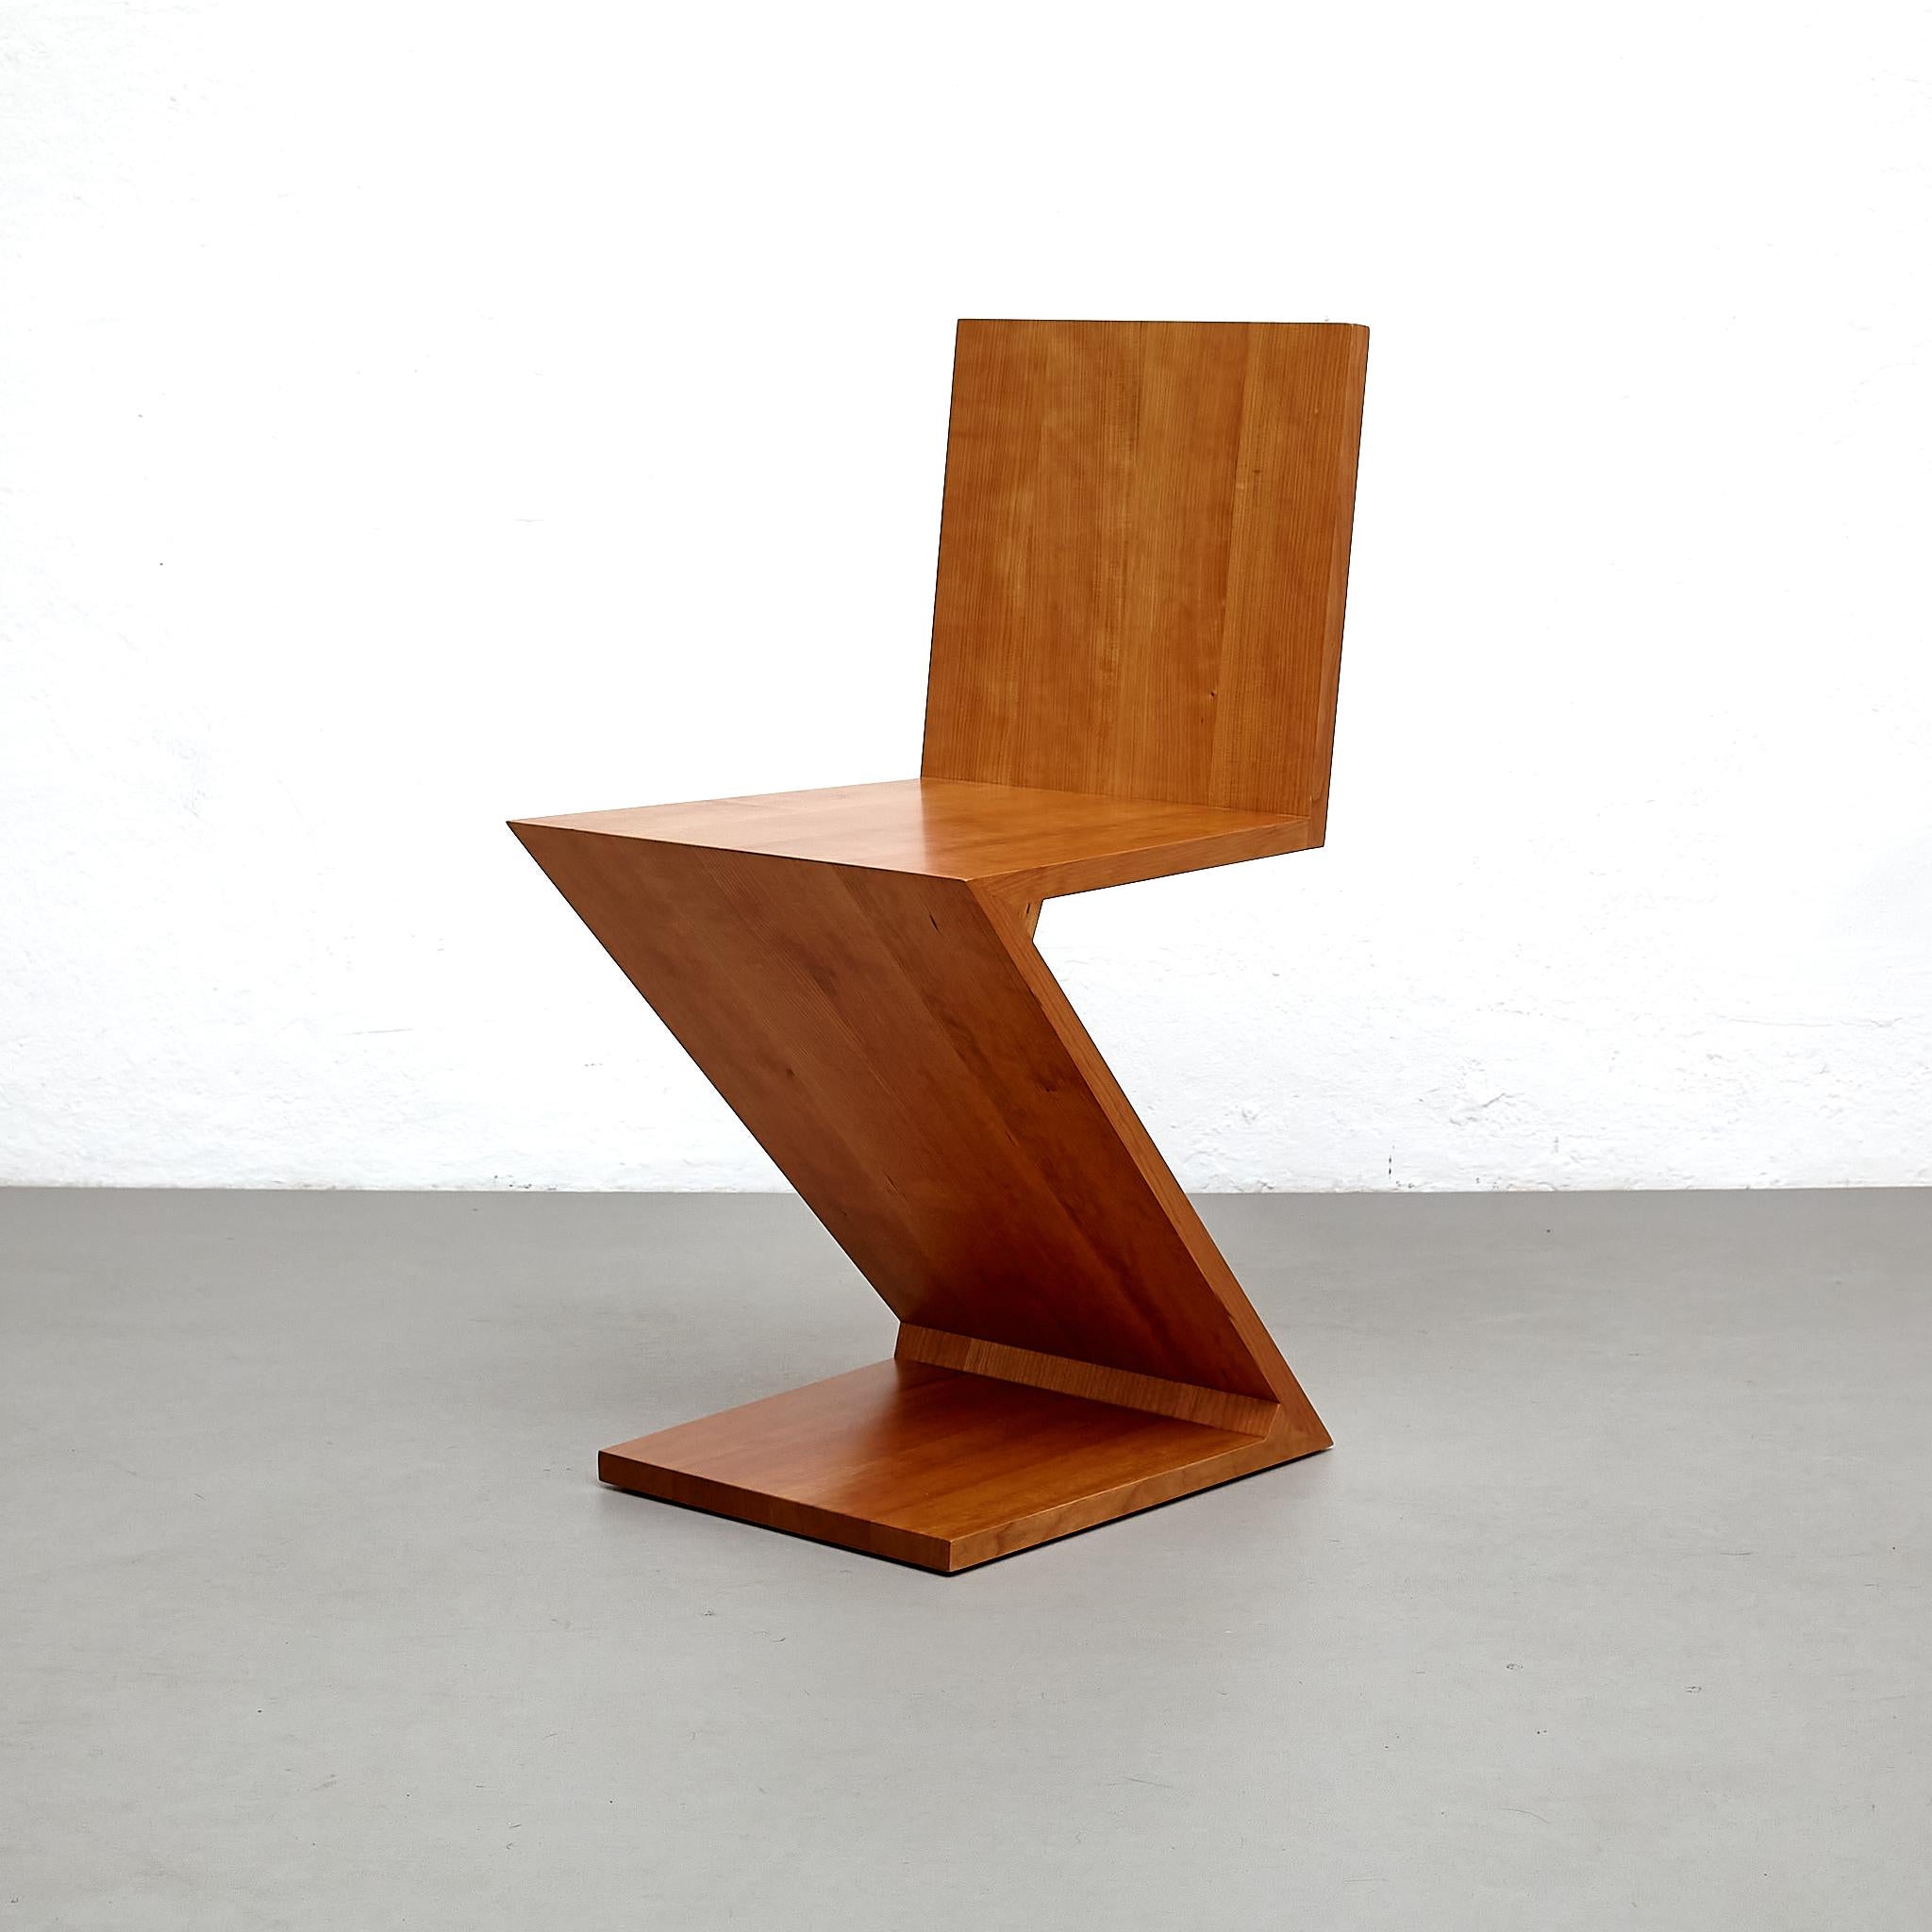 Chair designed by Gerrit Thomas Rietveld in 1934. Relaunched in 1973/ 2011.

Manufactured by Cassina in Italy.

Materials:
Wood
 
Dimensions:
D 43 cm x W 37 cm x H 74 cm (SH 43 cm)

Designed by Gerrit Rietveld, this chair provided an early